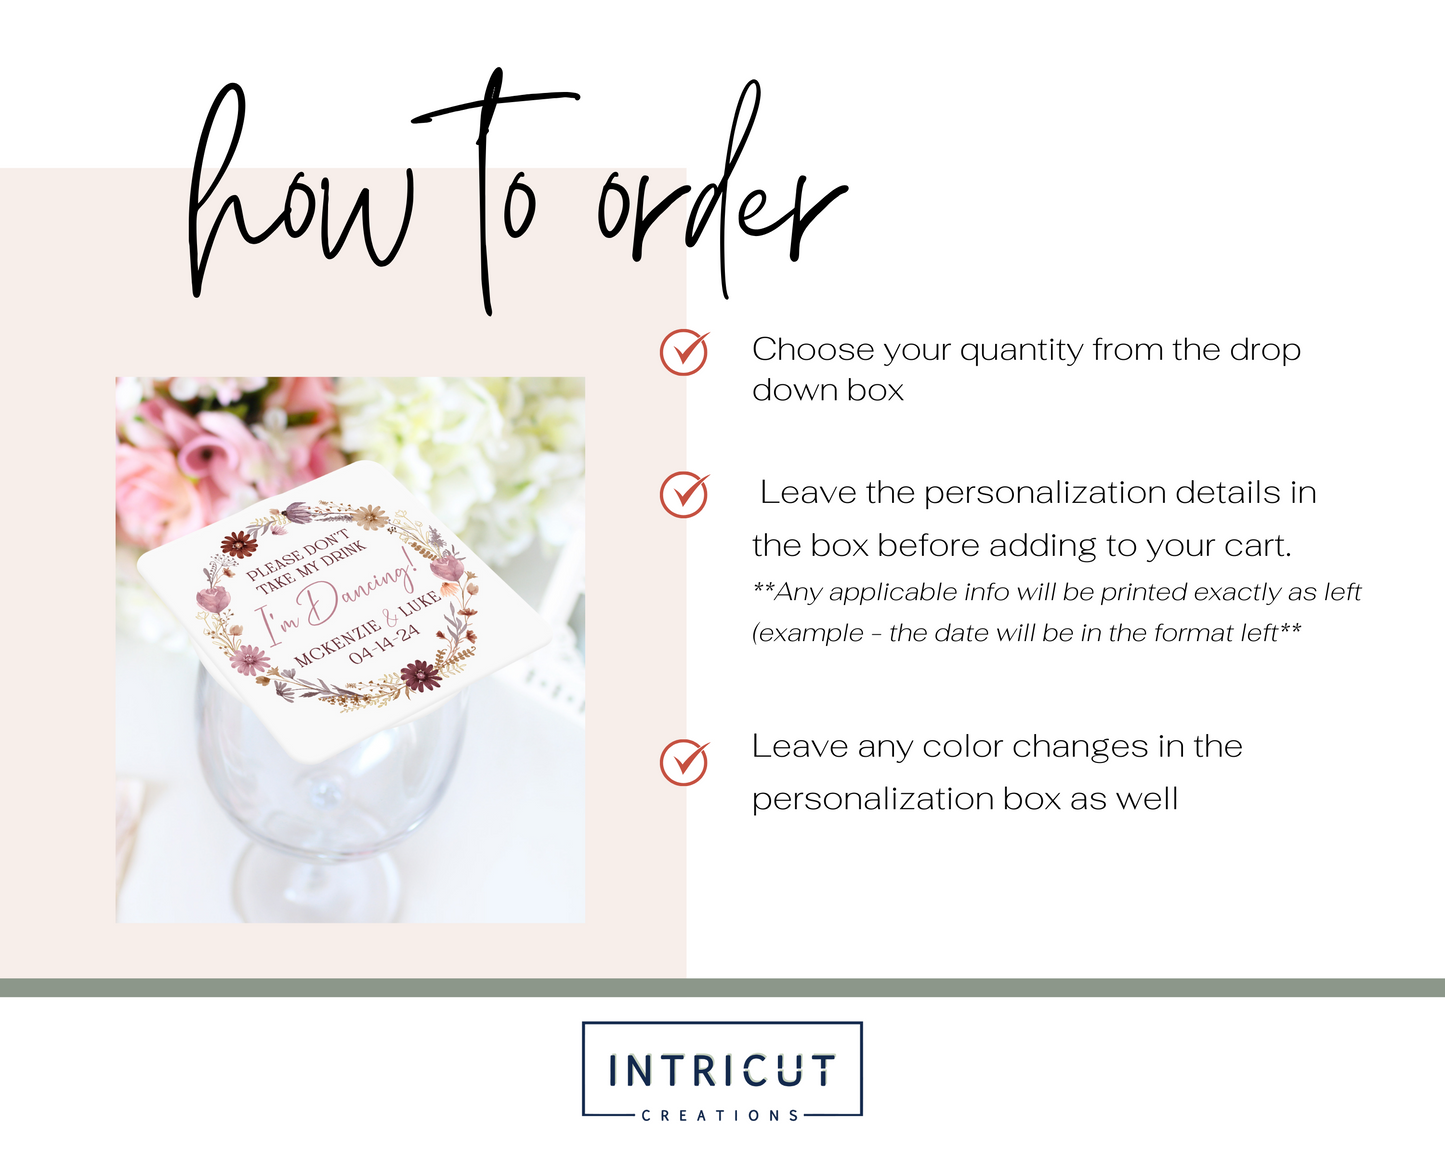 how to order: choose shape and quantity, leave personalization details, text color can be changed but artwork cannot